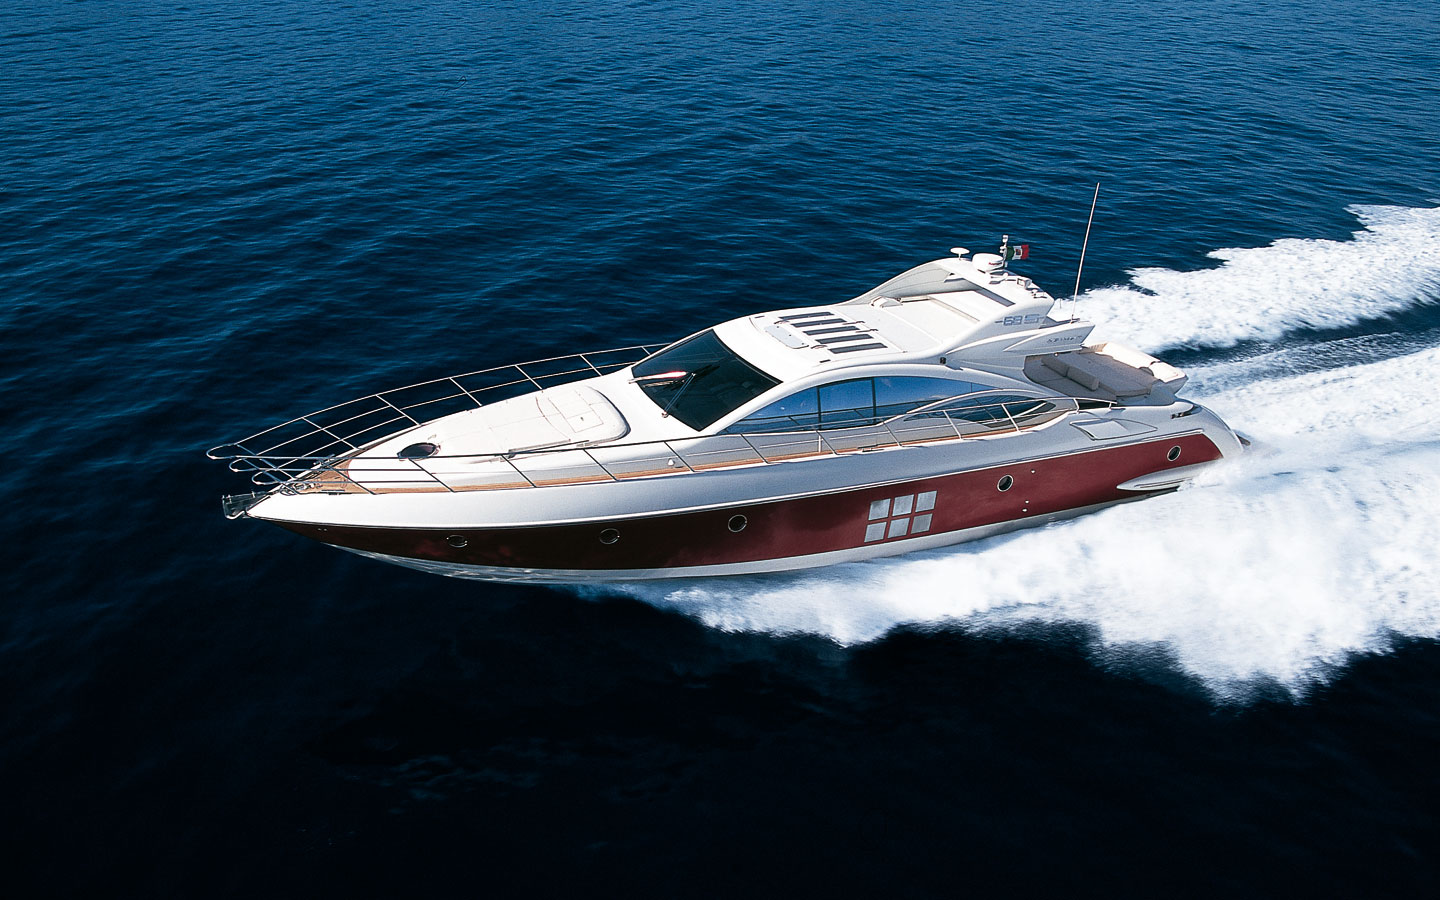 Motor yacht SAPORE DI SALE - From Above